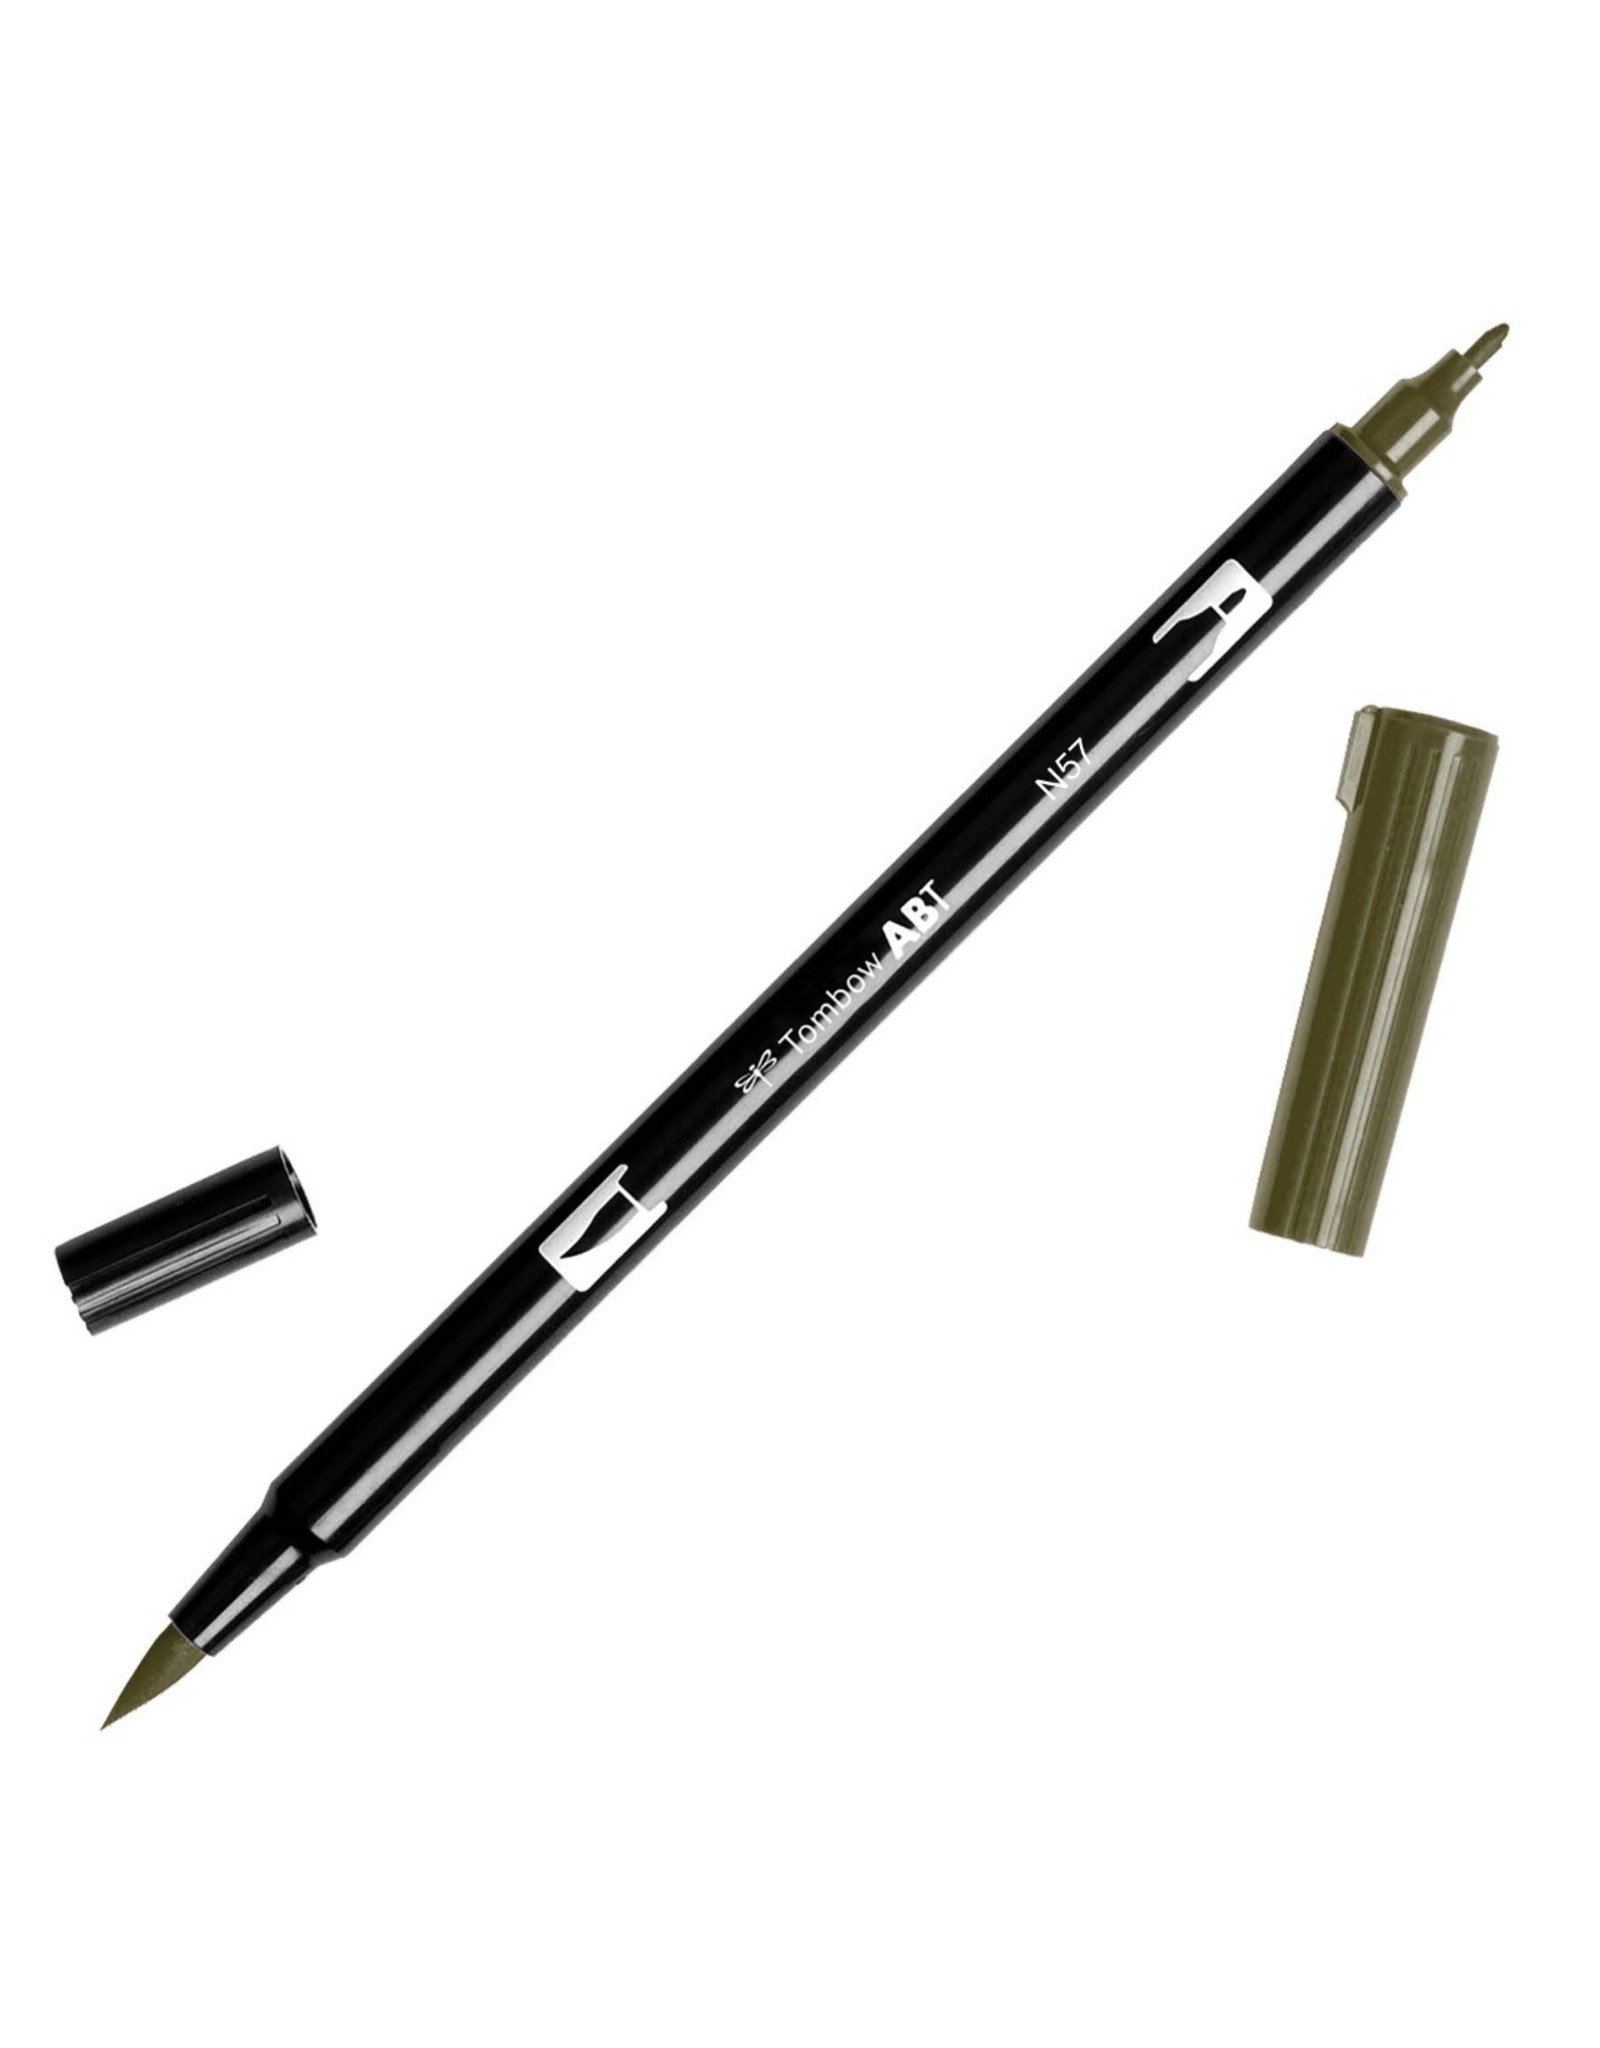 TOMBOW TOMBOW ABT-N57 WARM GRAY 5 DUAL BRUSH MARKER